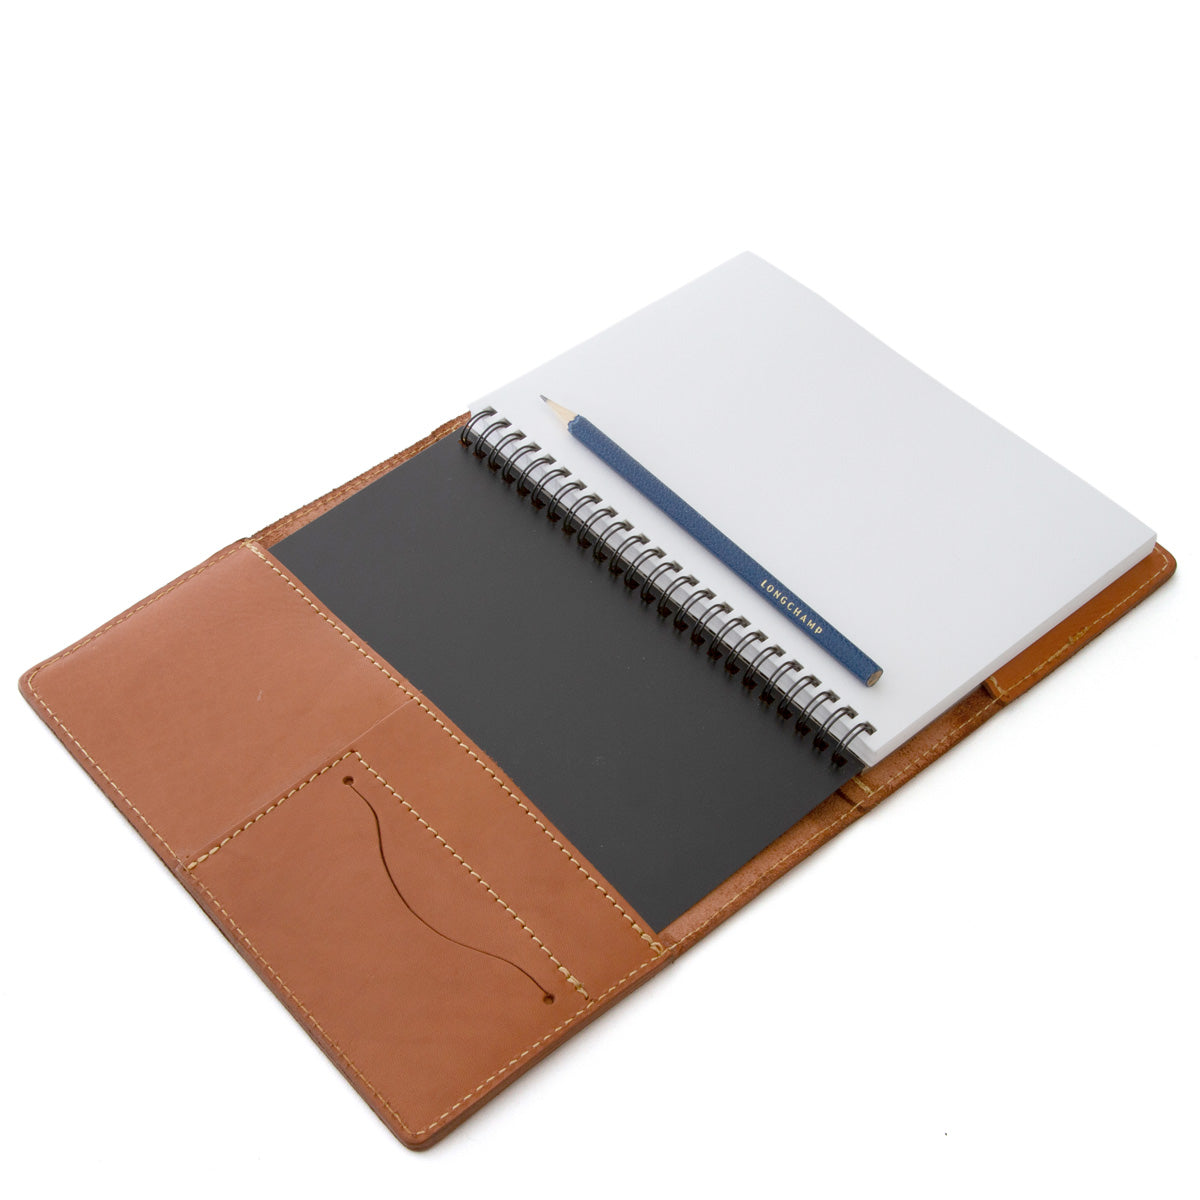 Swags A5 Book Cover - Tan